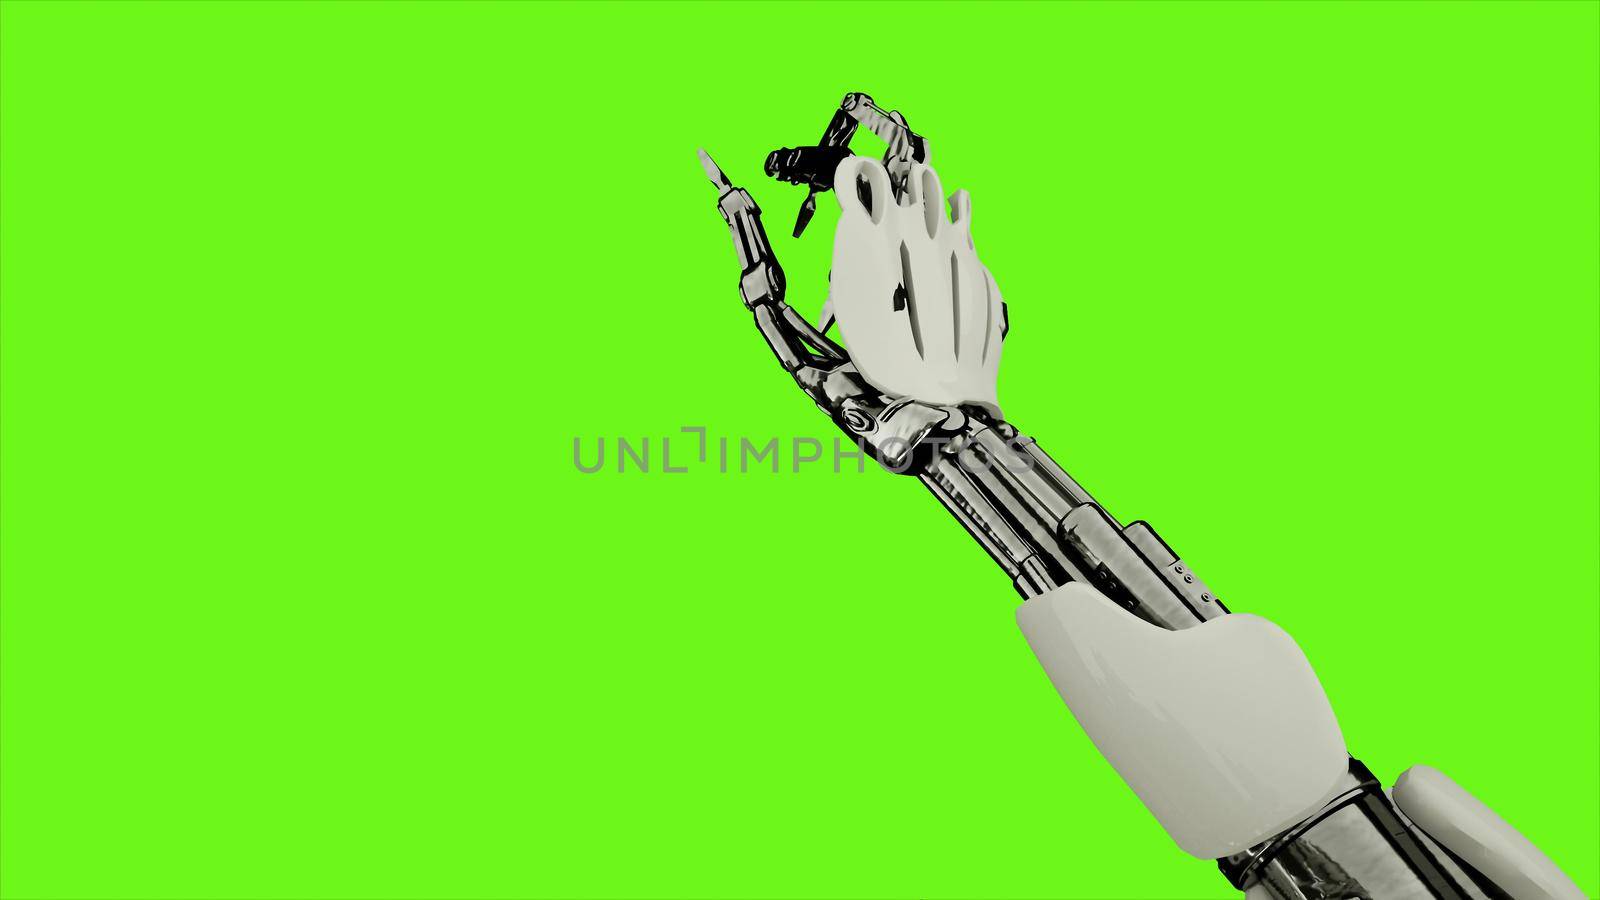 Robot android is presses the button. Illustration on green screen background.